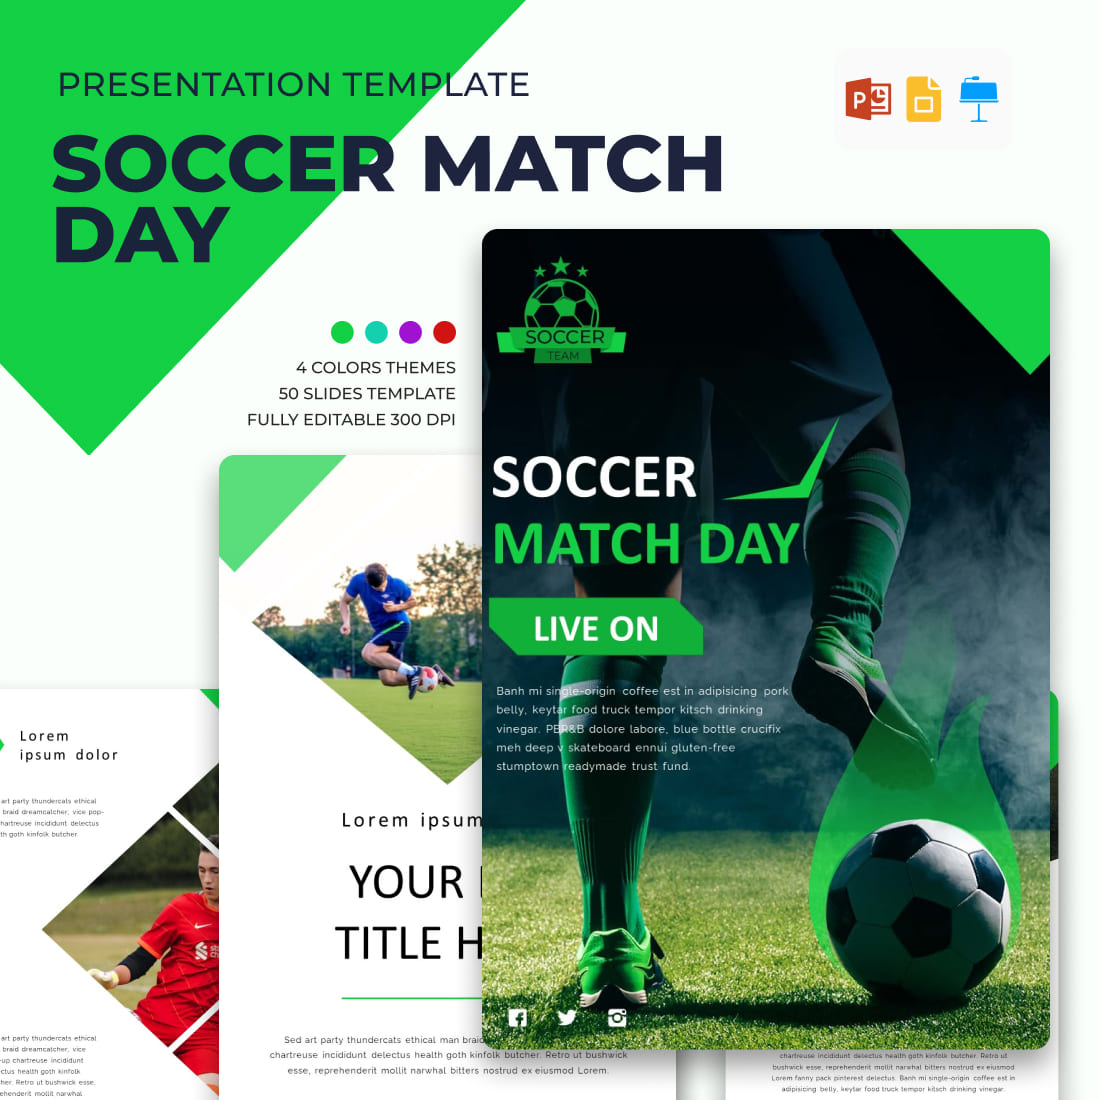 4 color themes of soccer match day.